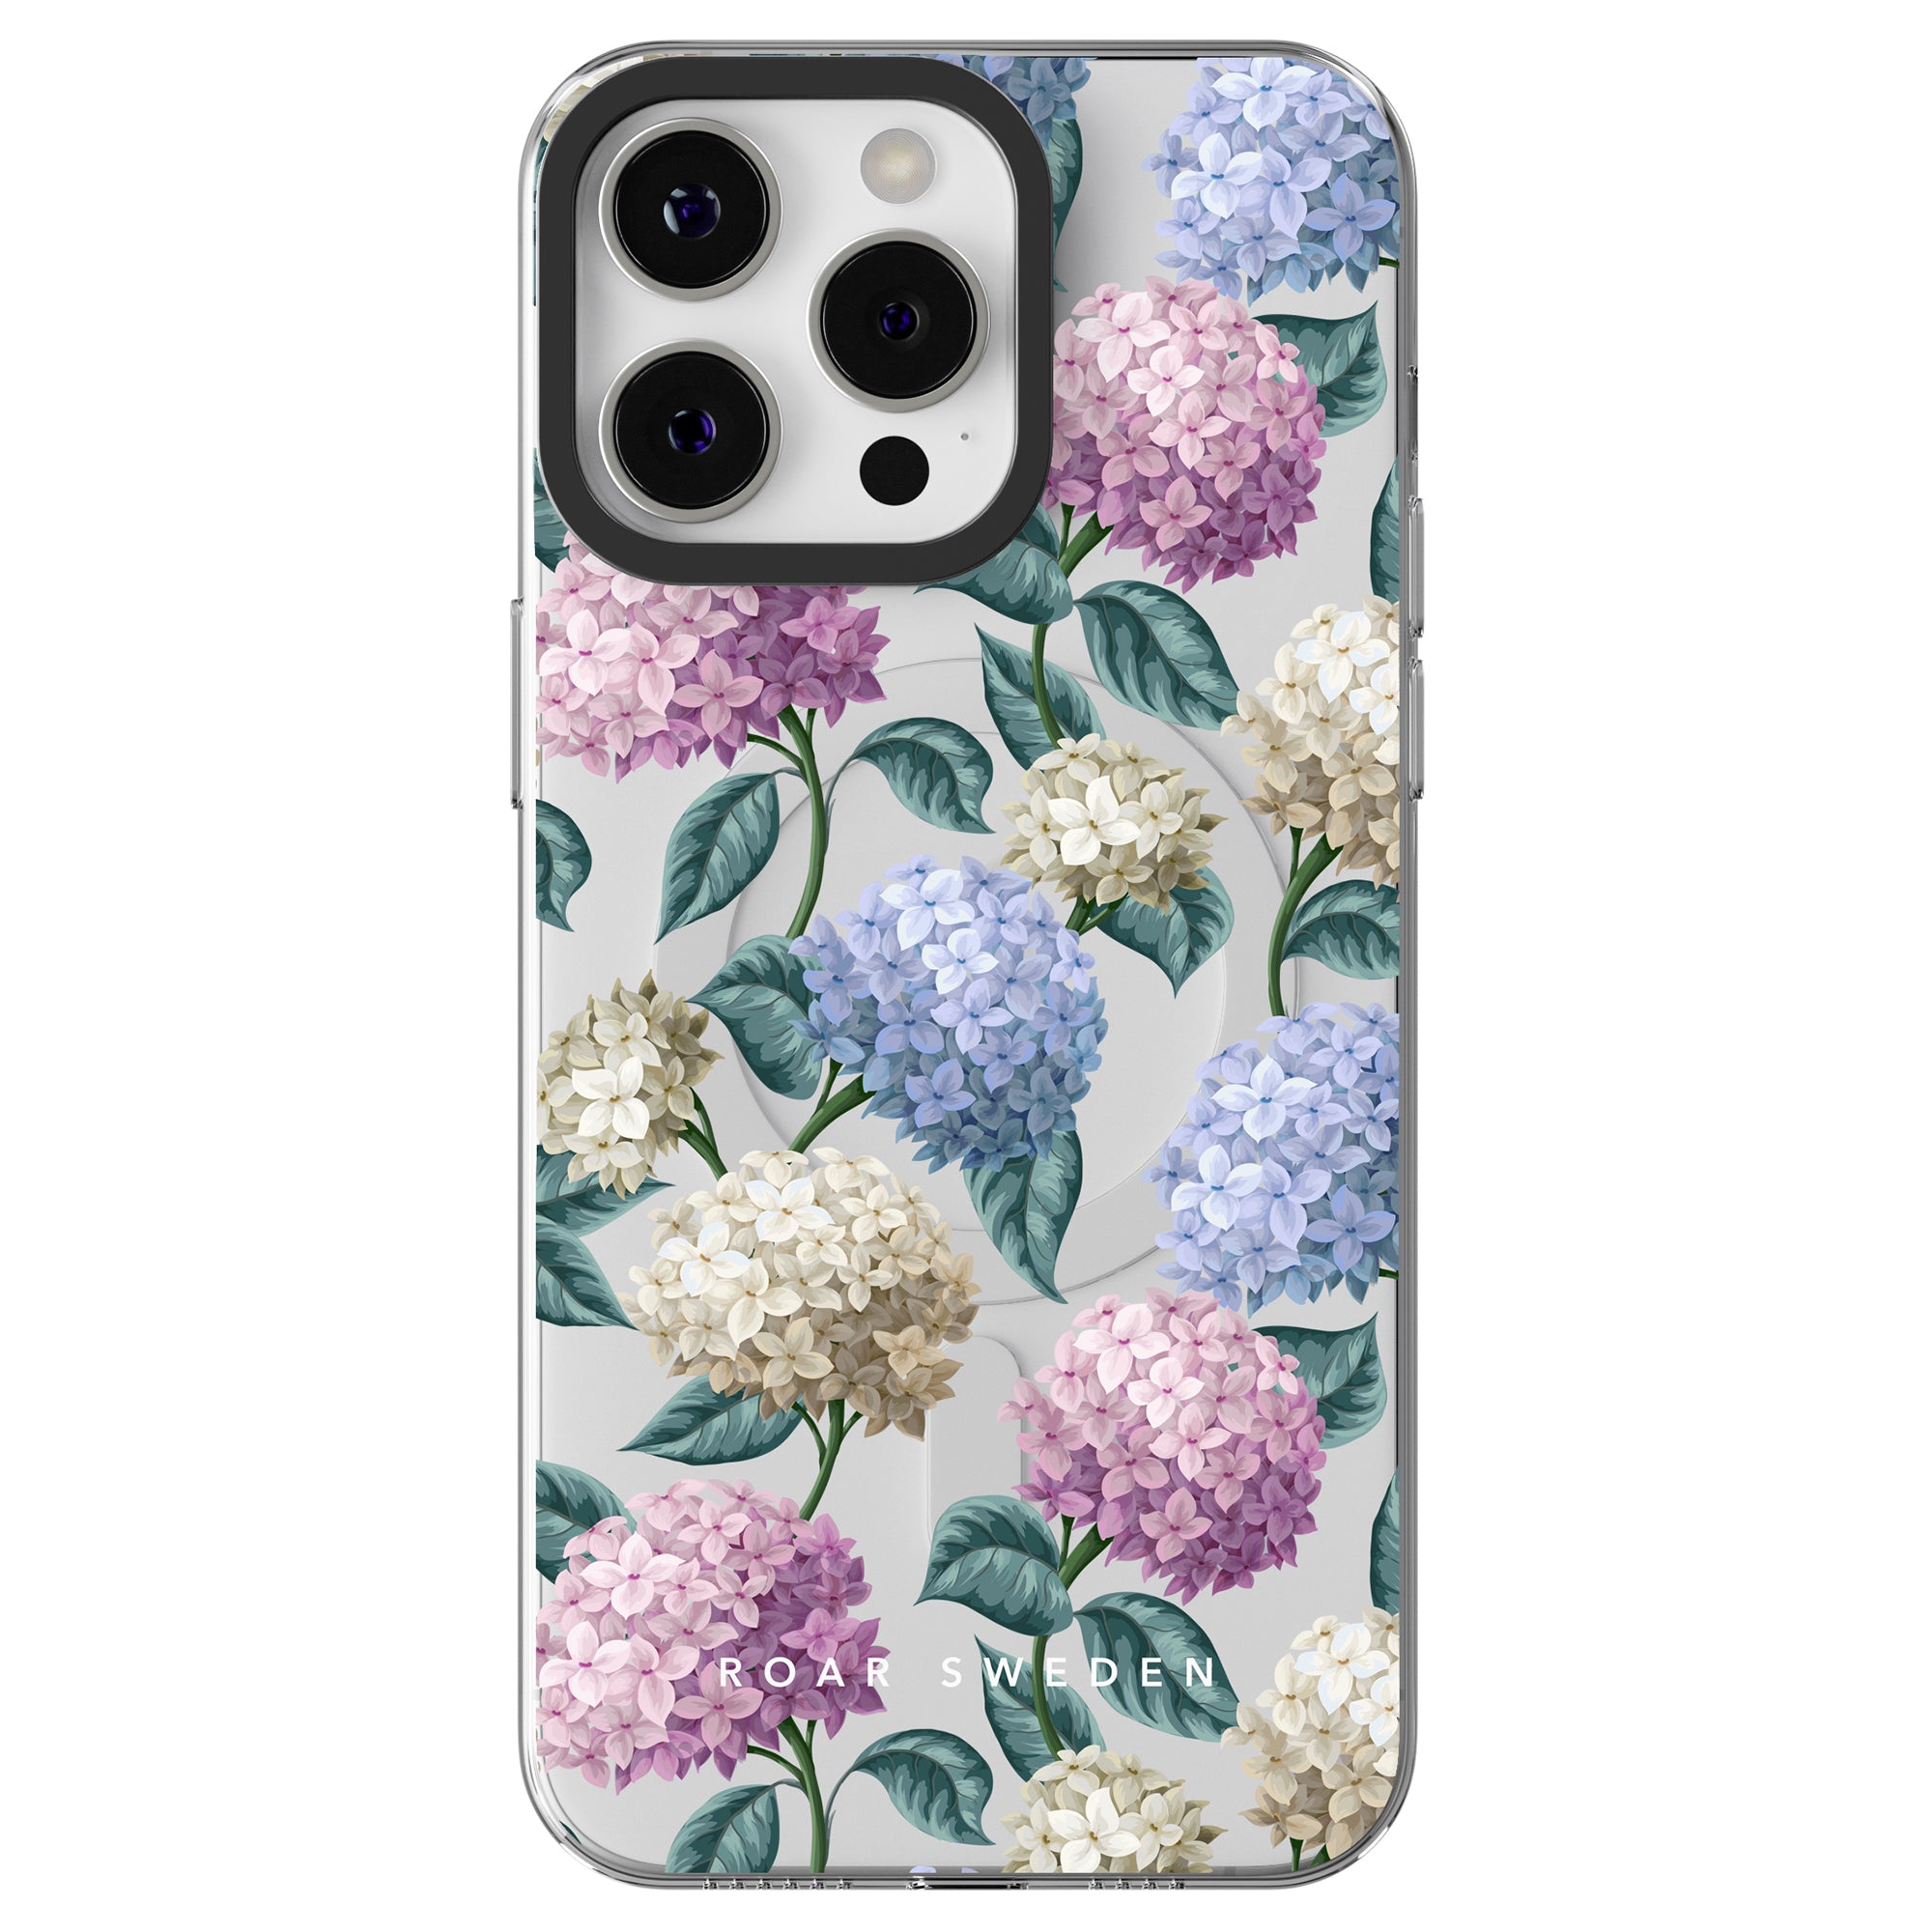 Introducing the Hydrangea - MagSafe: a phone case with a floral design featuring hydrangeas in various colors, such as pink, blue, and white. Part of our Floral Collection, it includes "ROAR SWEDEN" at the bottom and is compatible with MagSafe accessories.